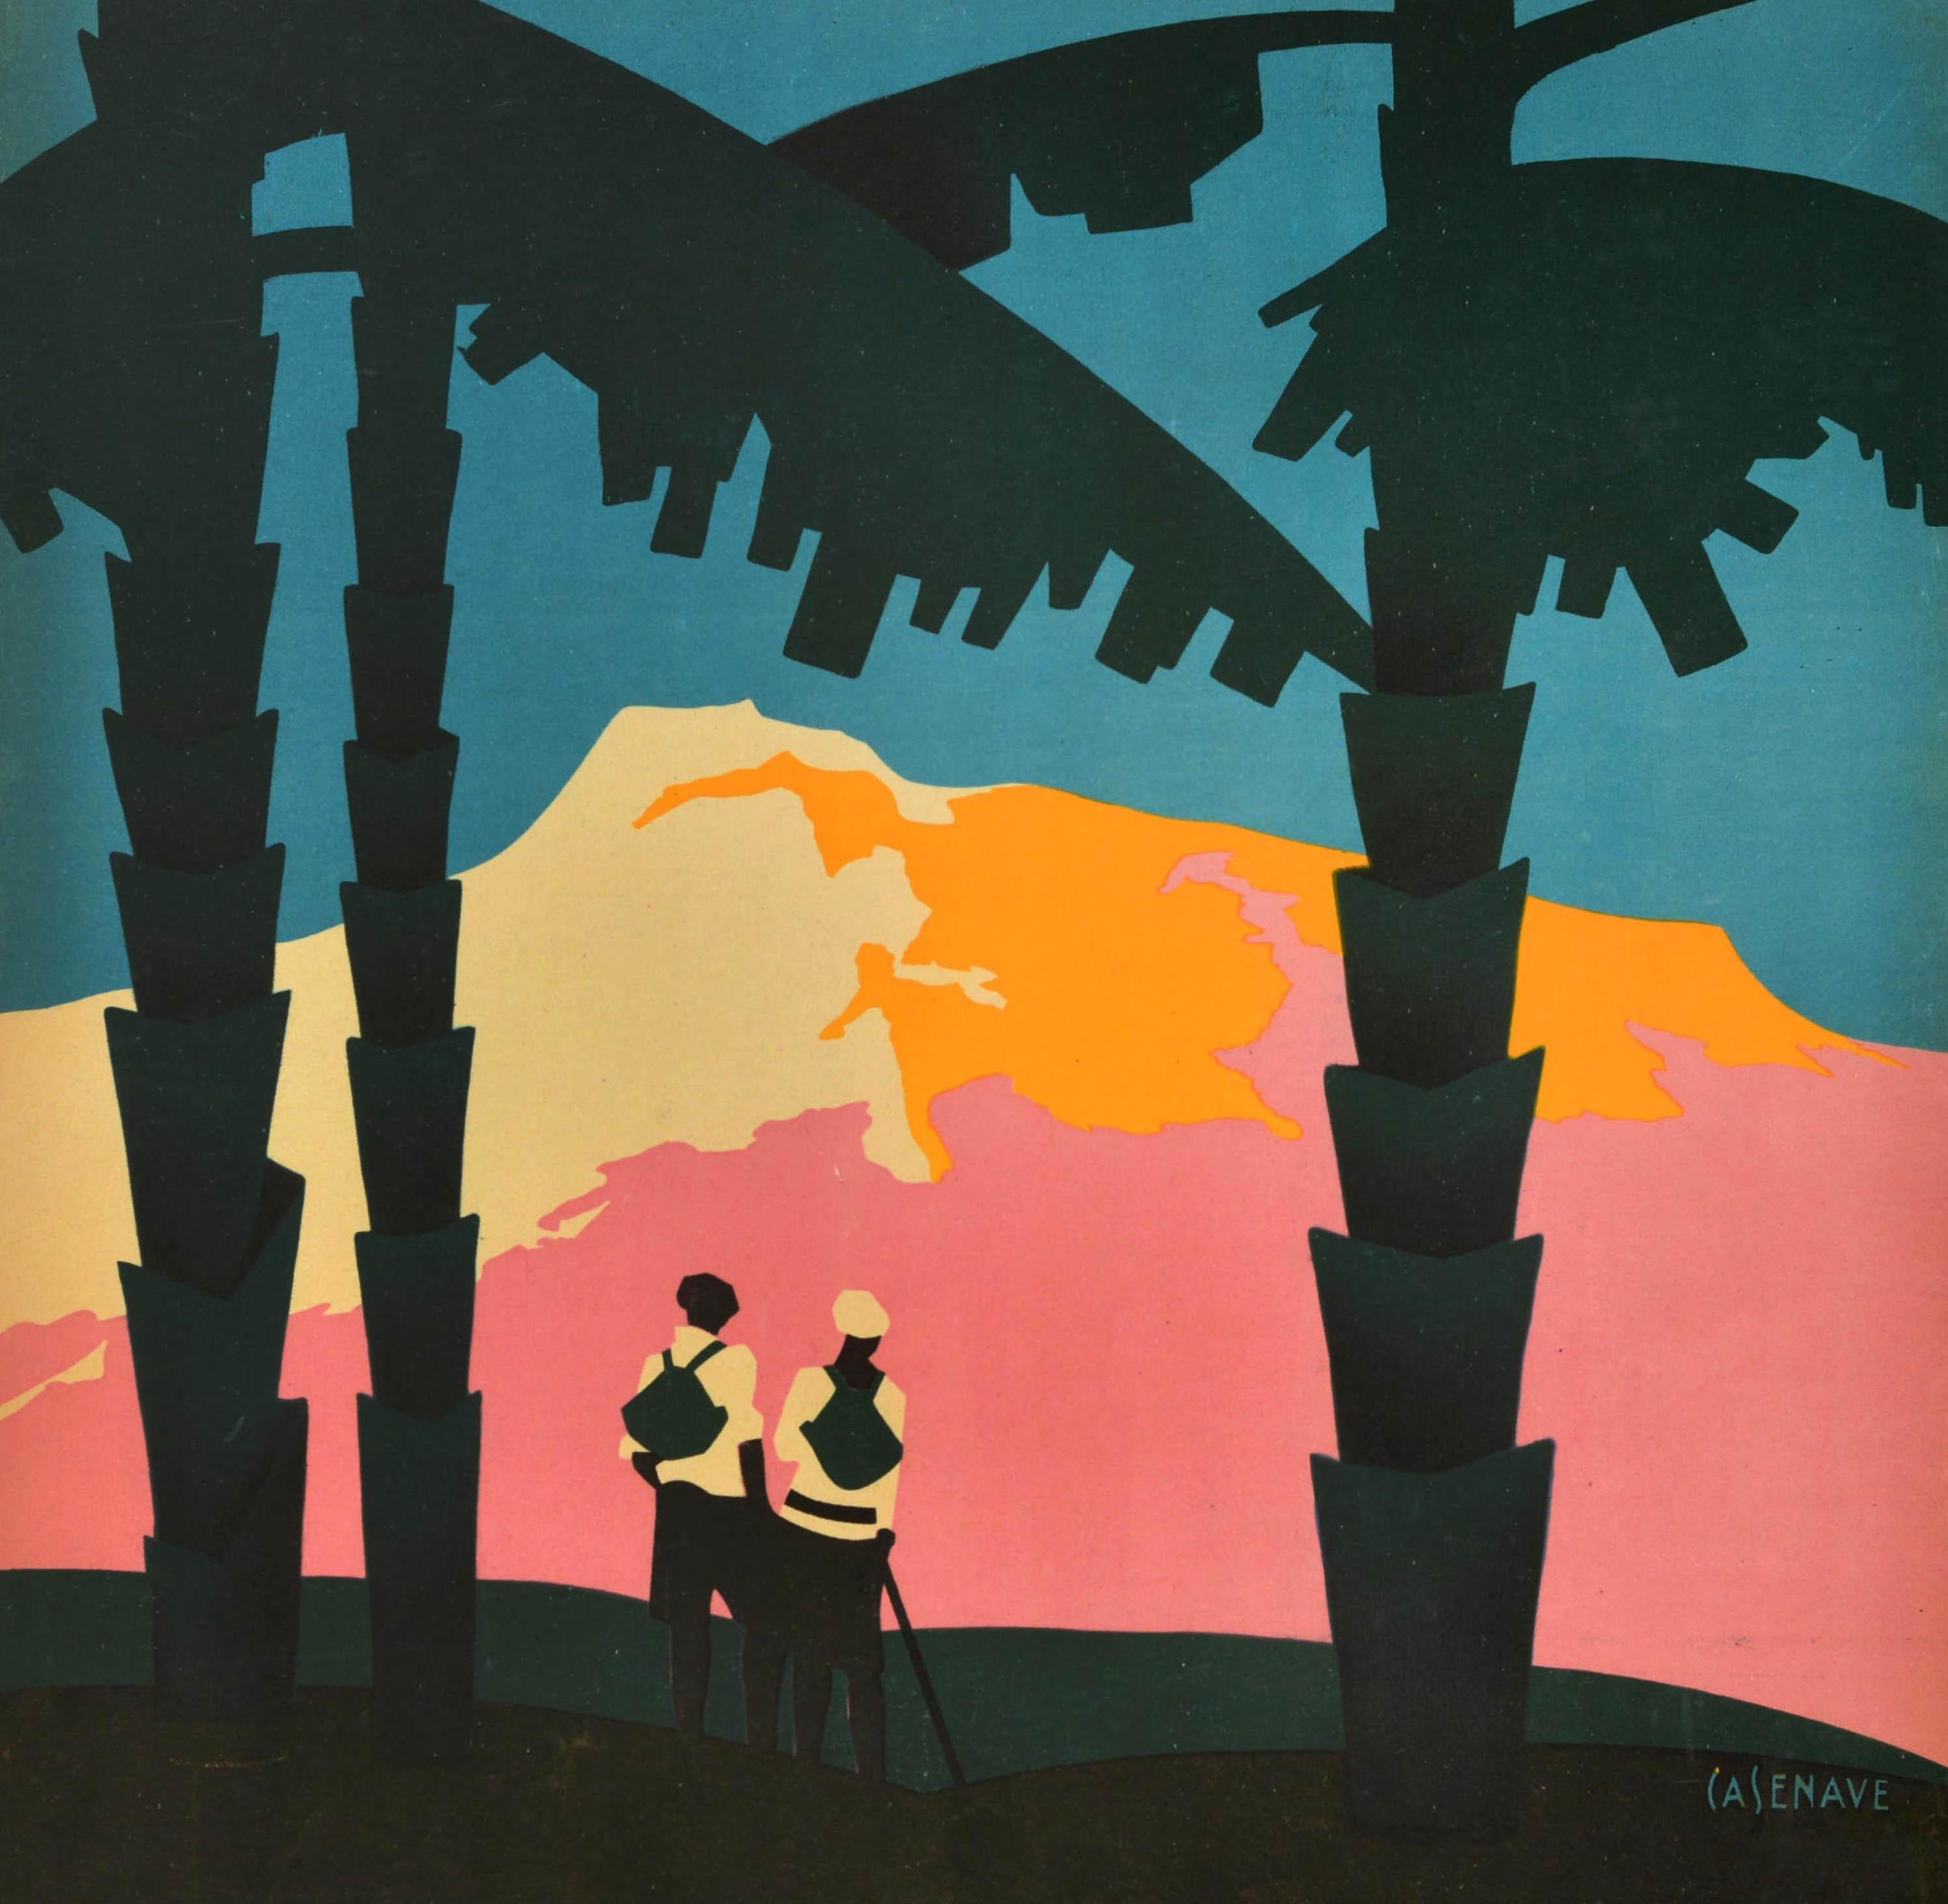 Original antique travel poster - L'hiver en Espagne / Winter in Spain - featuring a stunning Art Deco design depicting two people wearing backpacks, one holding a walking stick, standing on a hill under palm trees and enjoying the scenic view